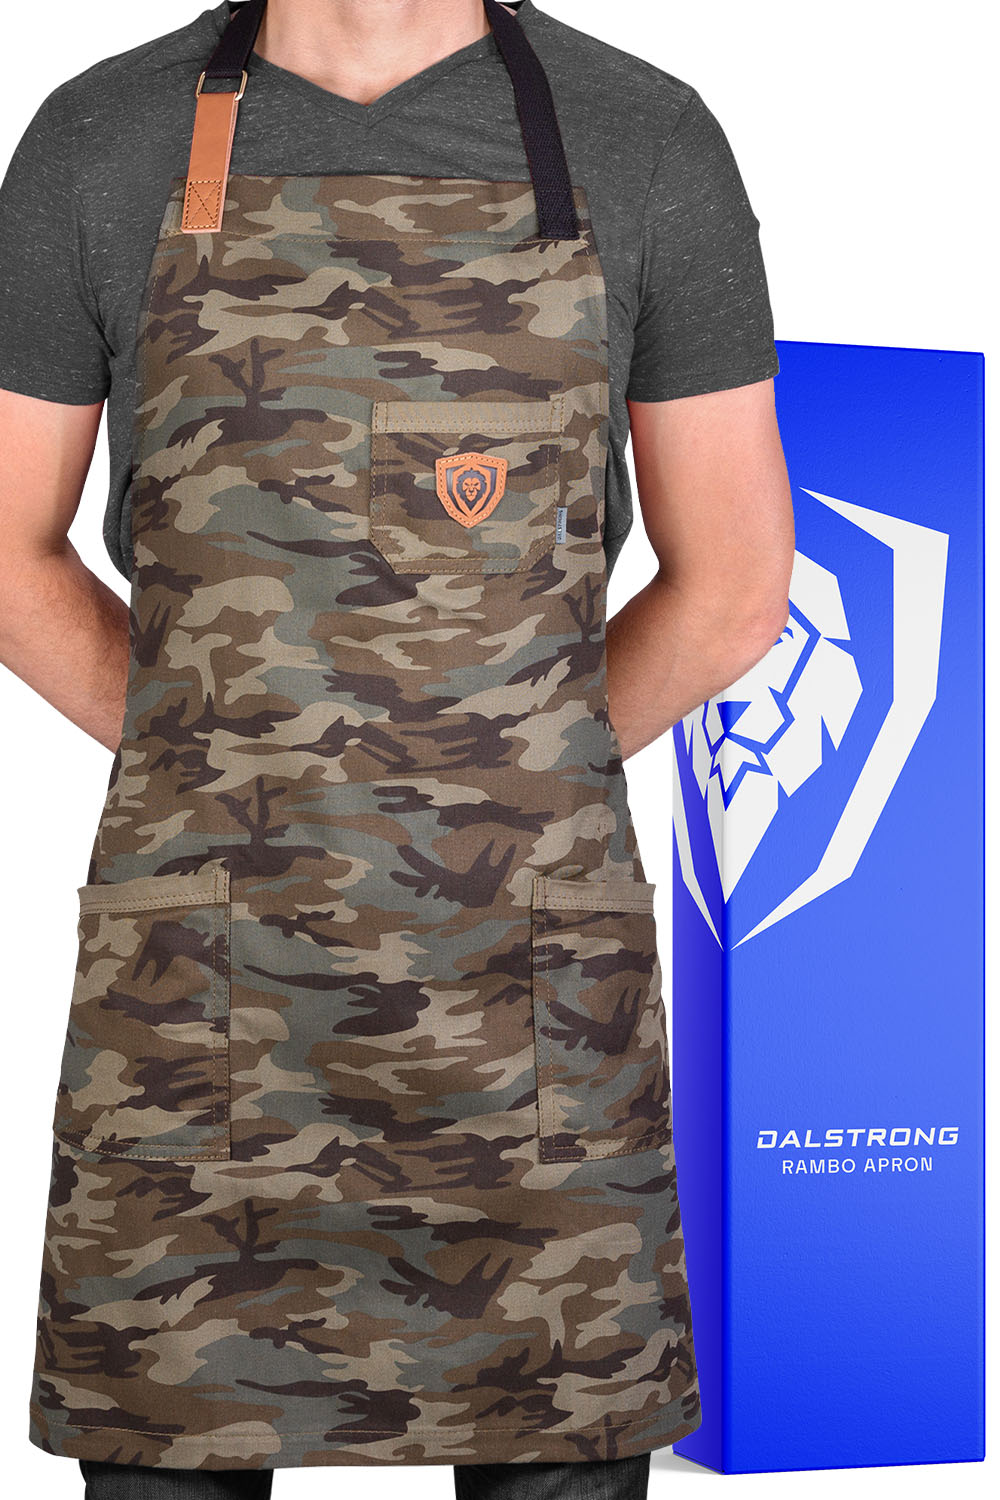 Dalstrong the kitchen rambo professional chef's kitchen apron in front of it's premium packaging.